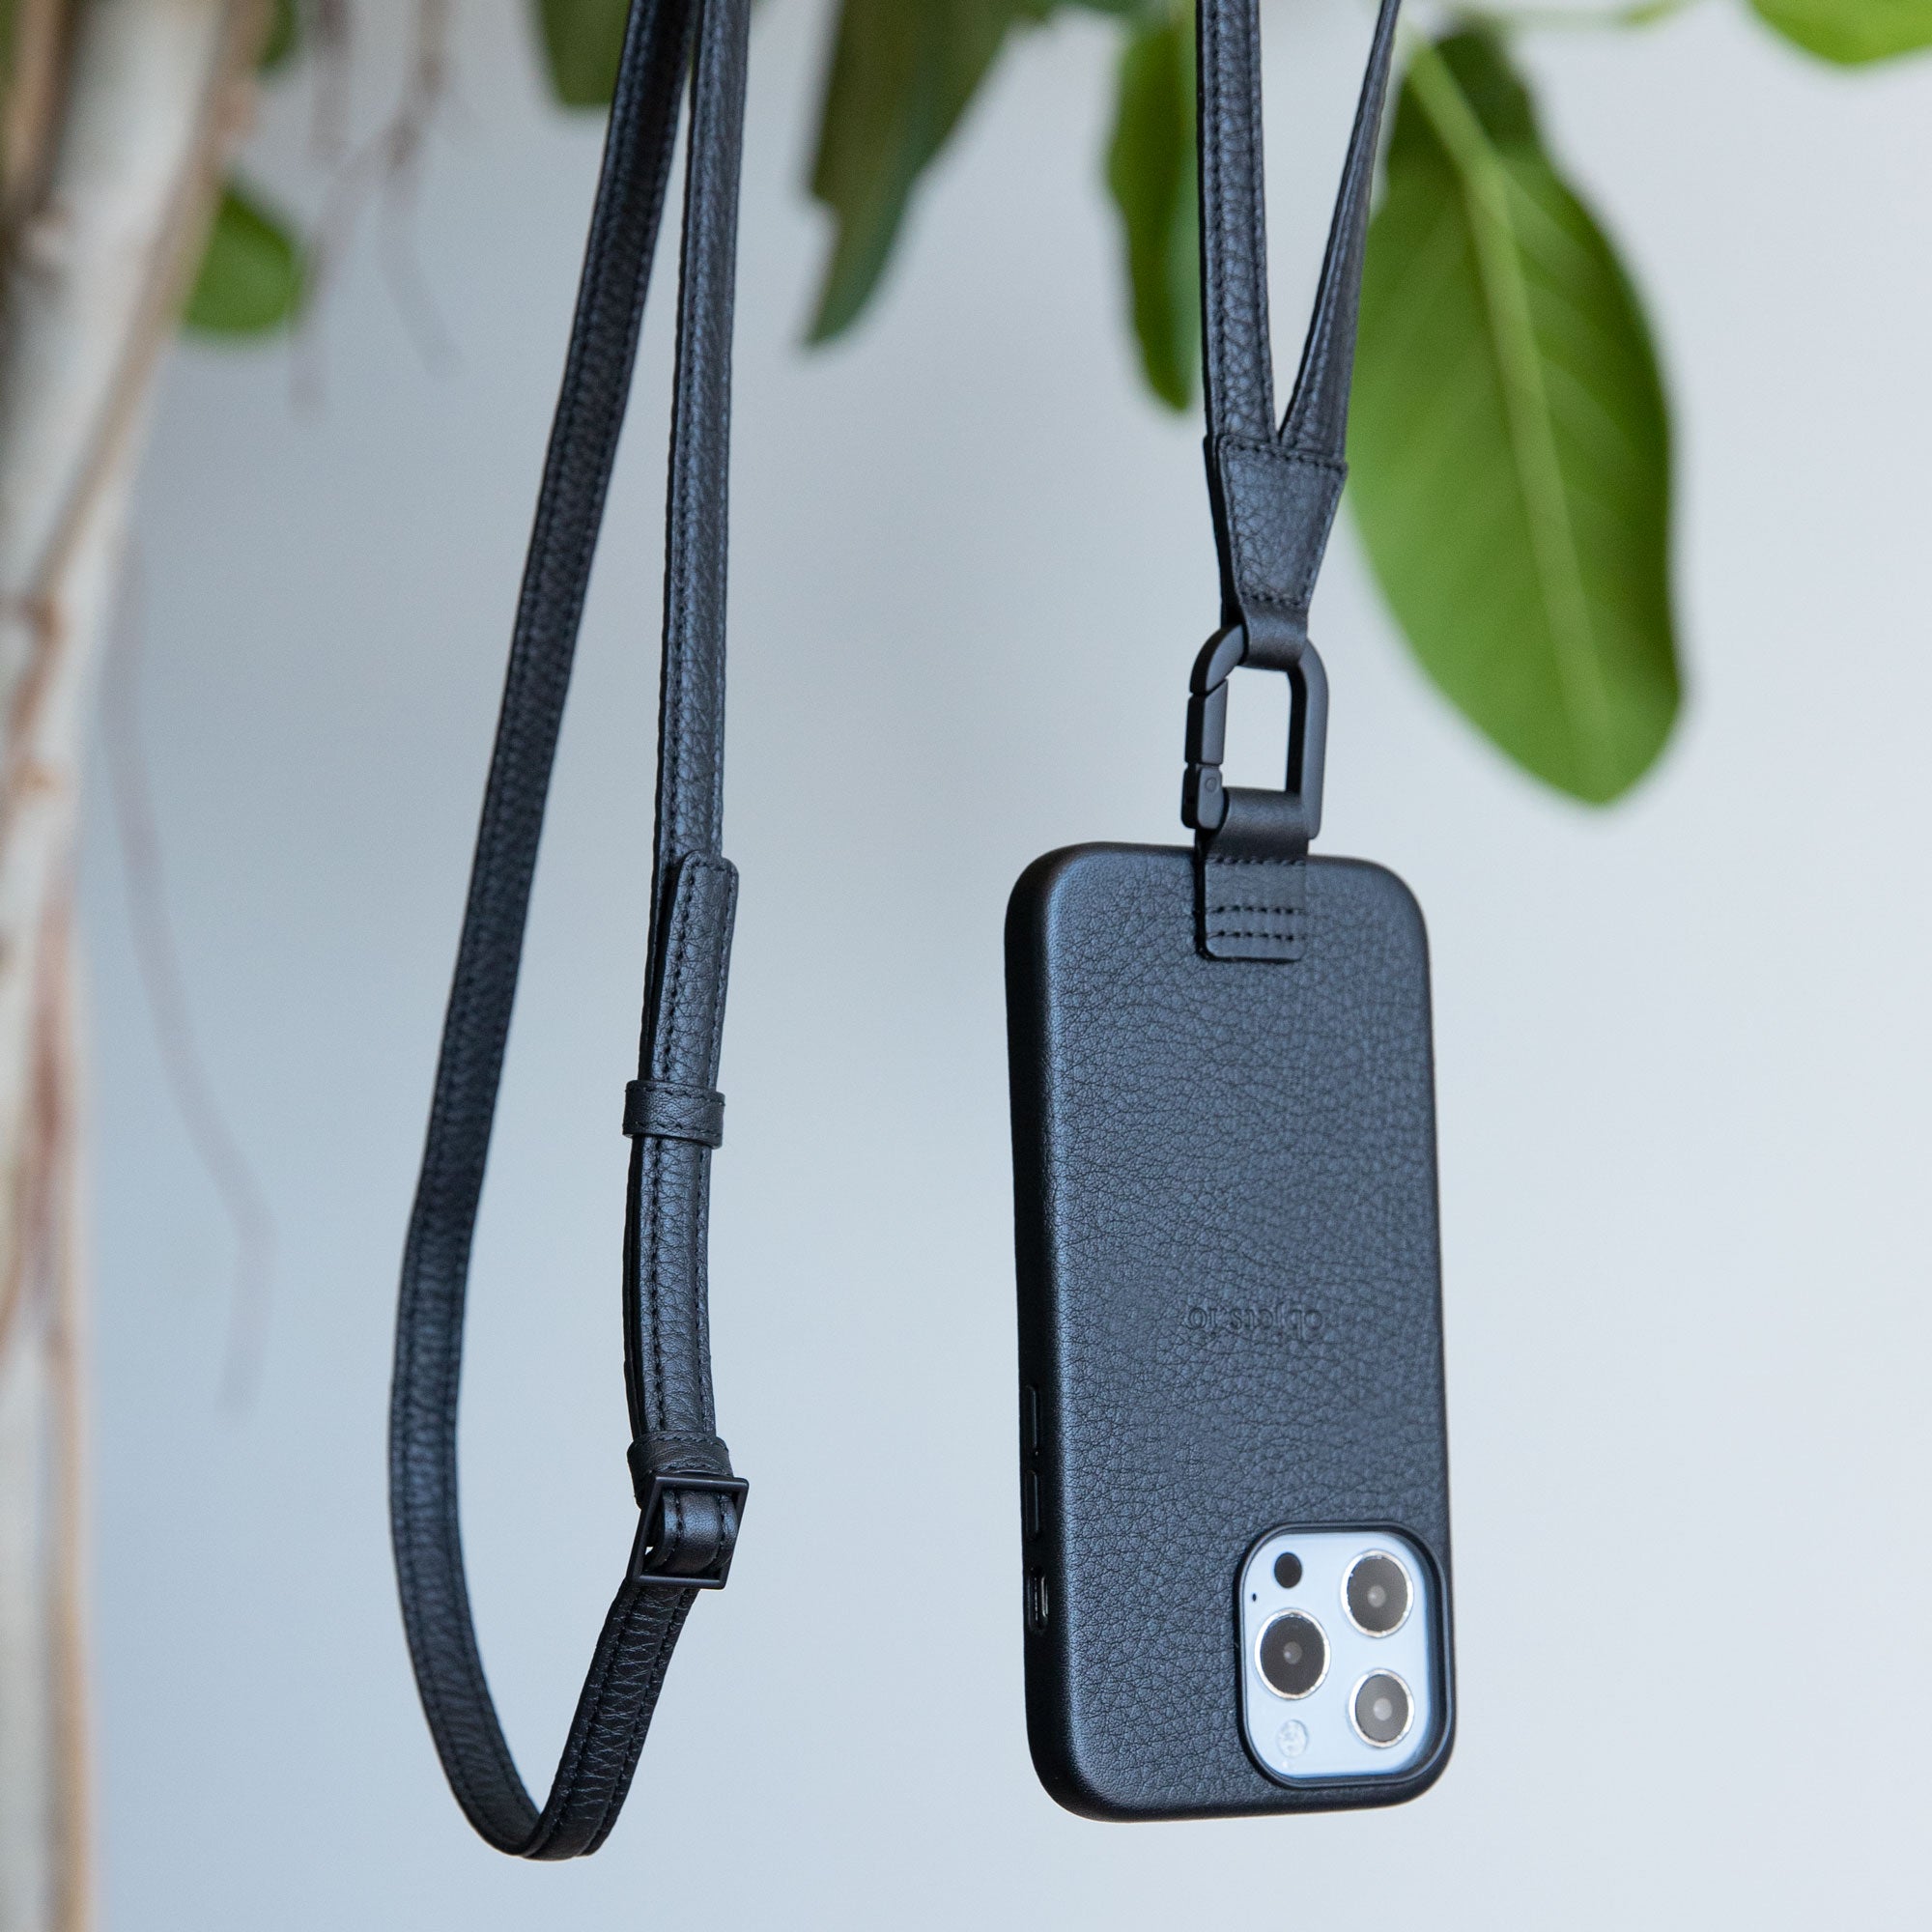 iPhone case with Adjustable Strap Accessory - Black